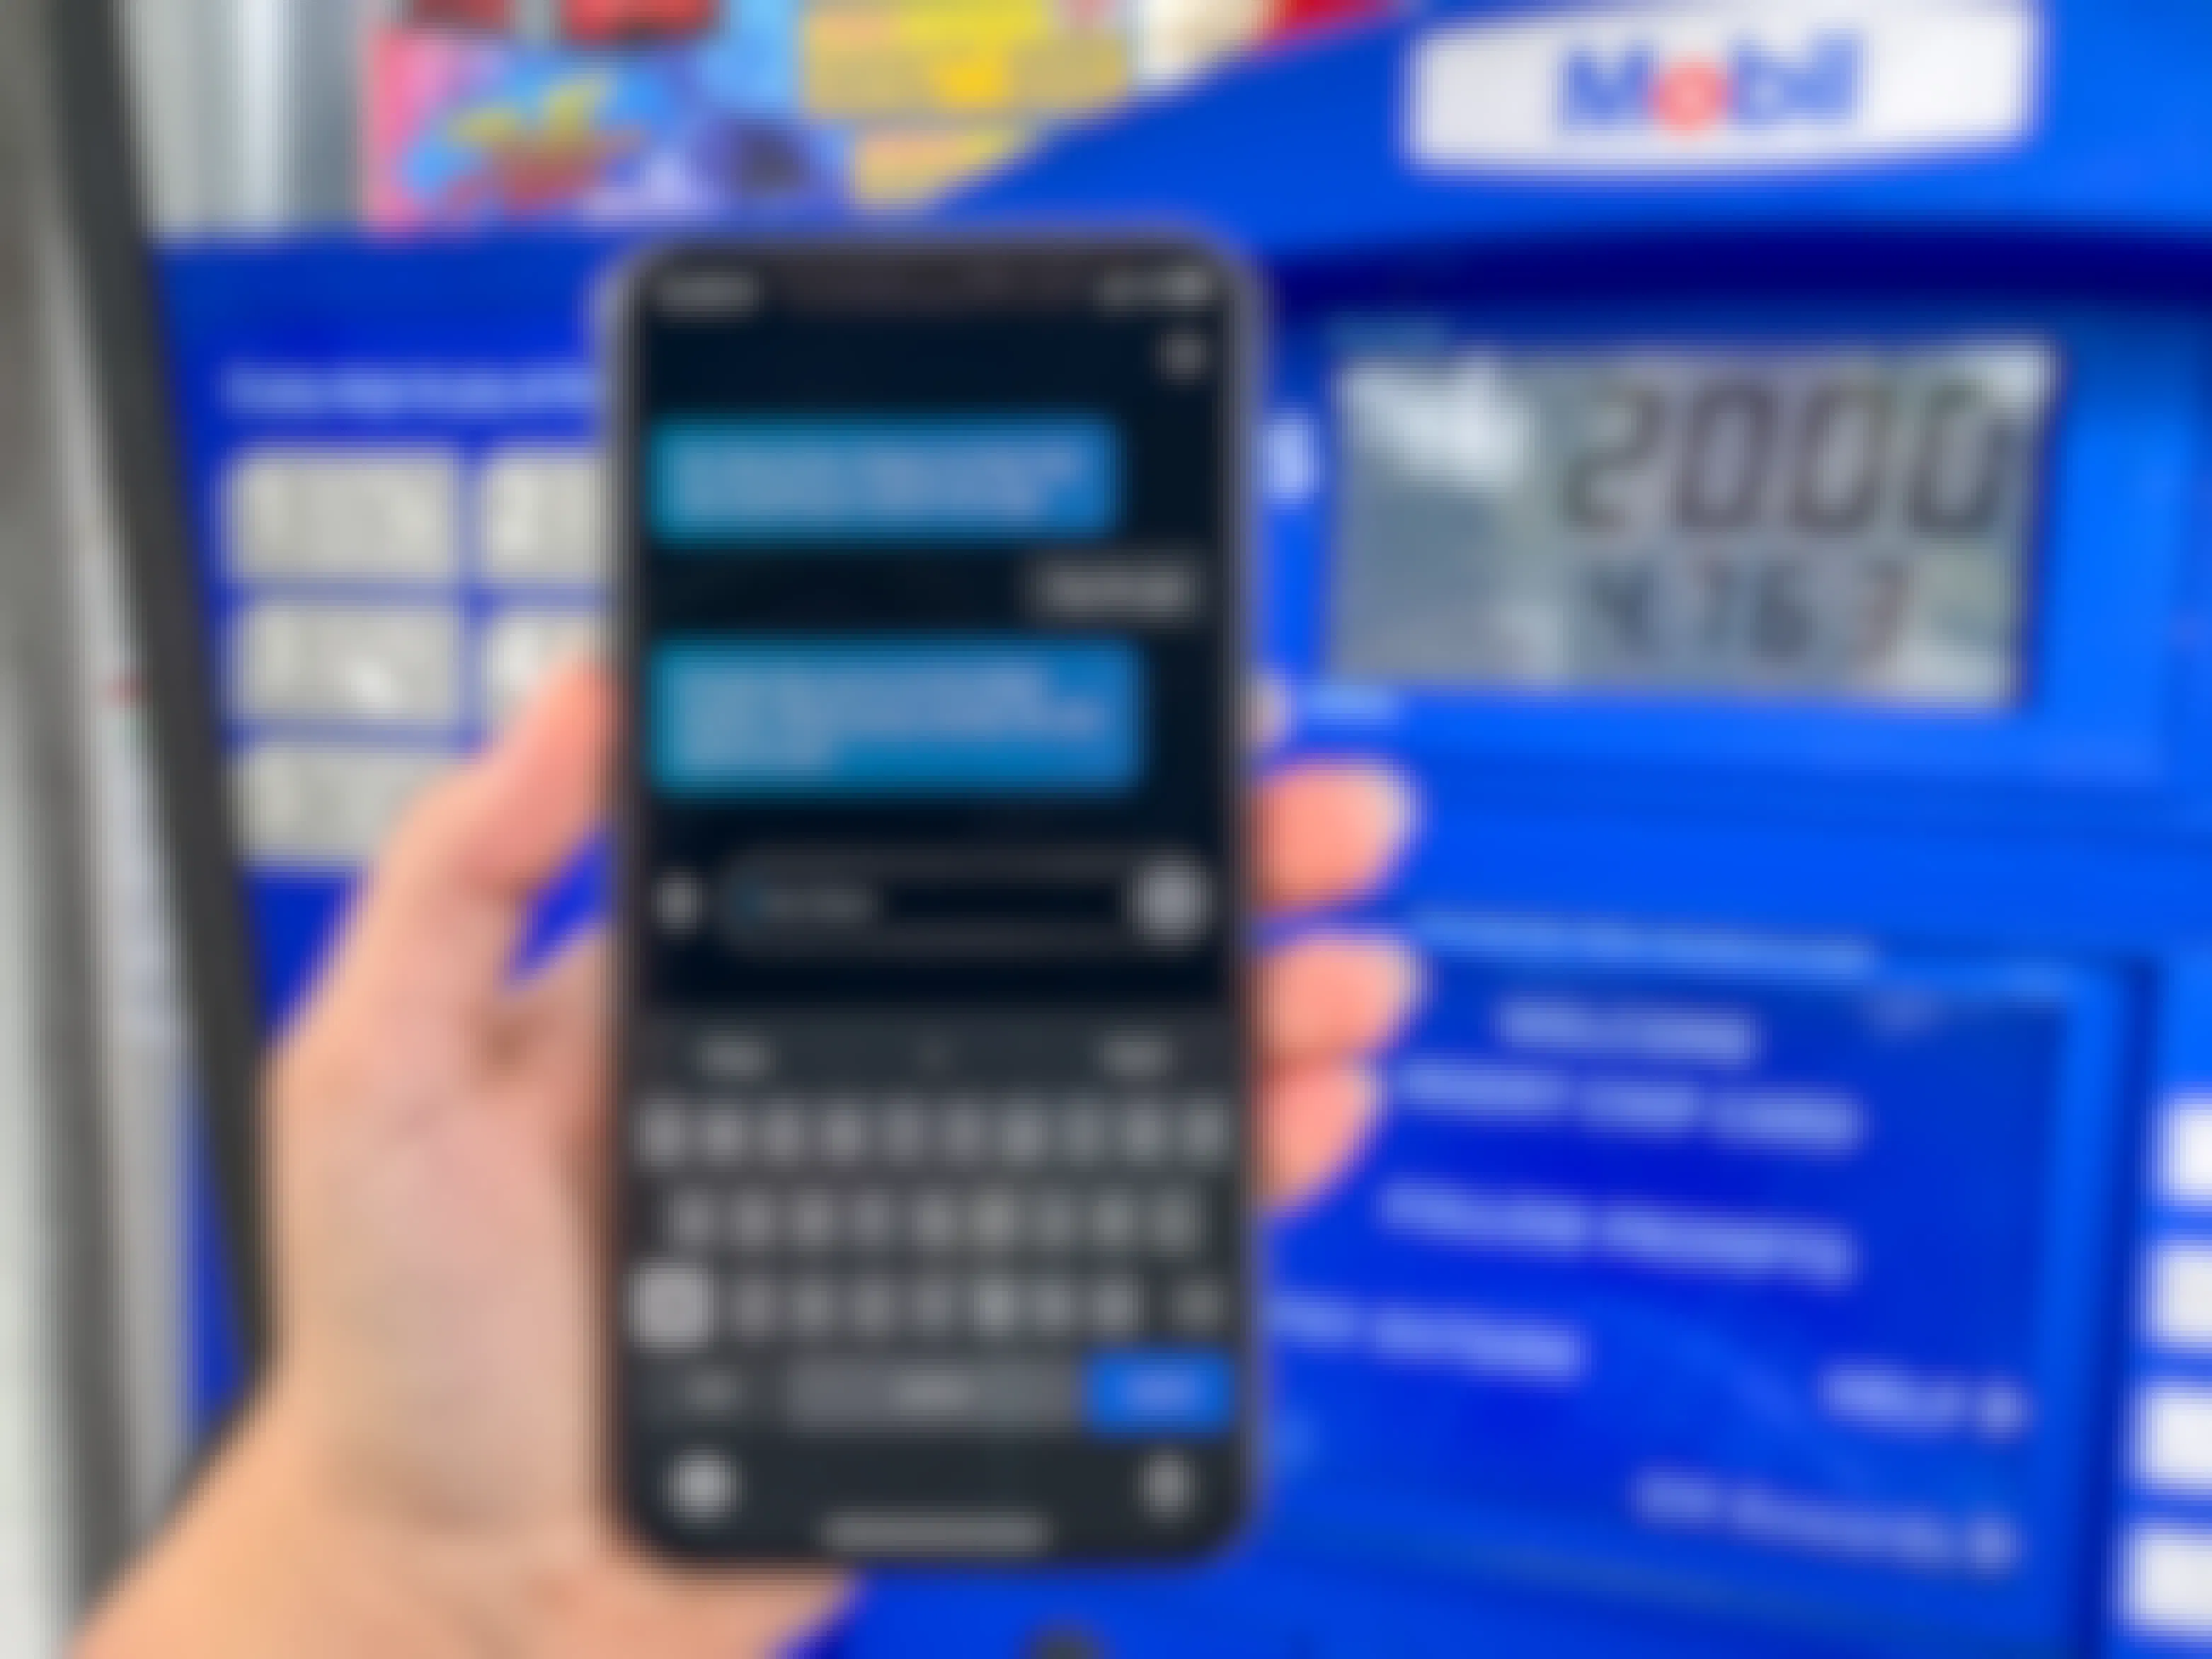 A person's hand holding up their iPhone, using the Amazon Alexa app to pay for gas at a Mobil gas station pump.